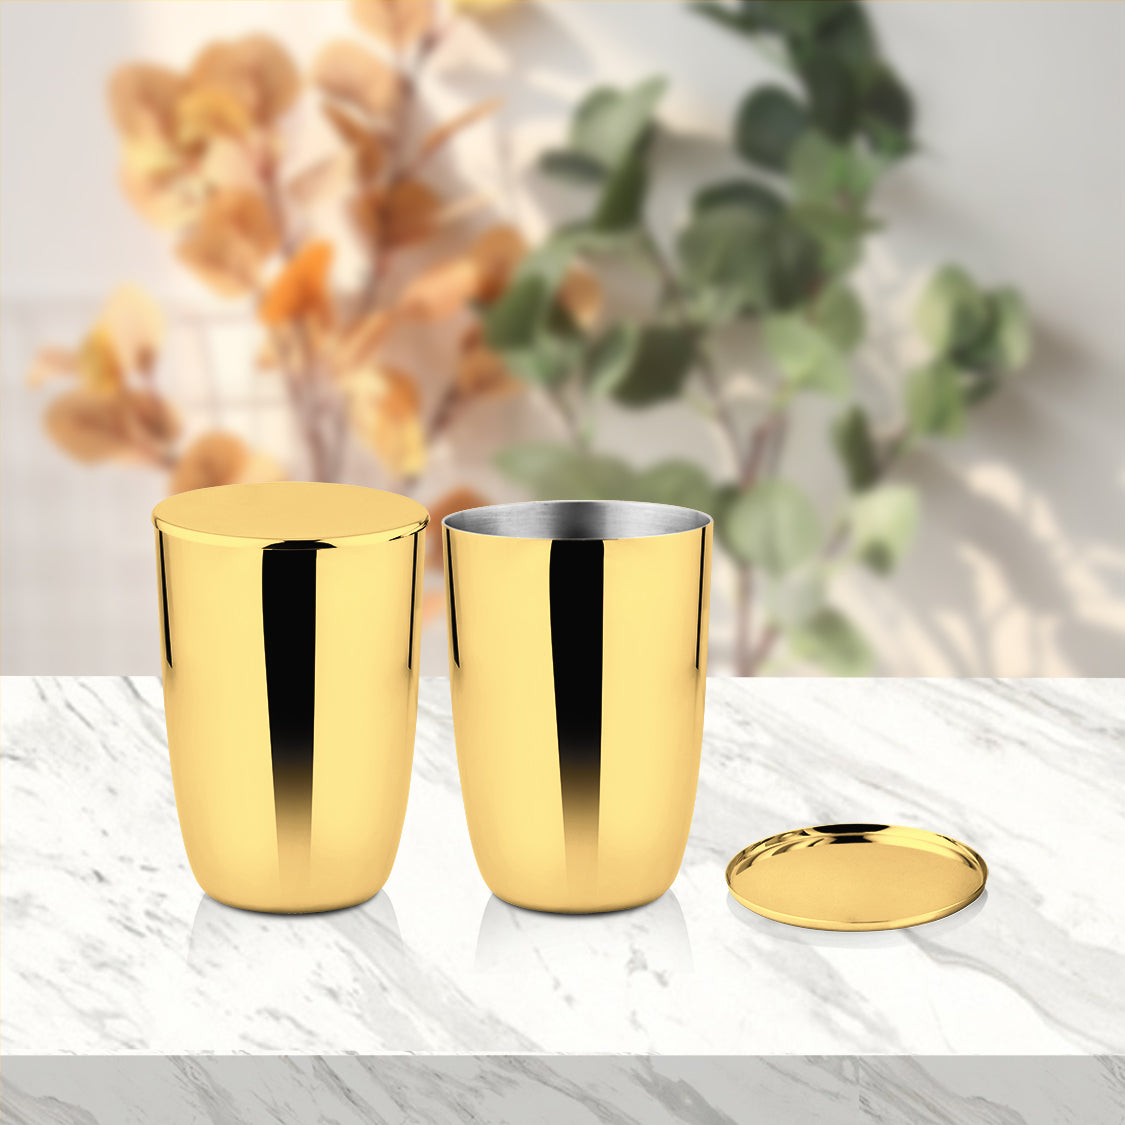 Stainless Steel 2 PCS Gold PVD Coated Glass with SS Lid Impression